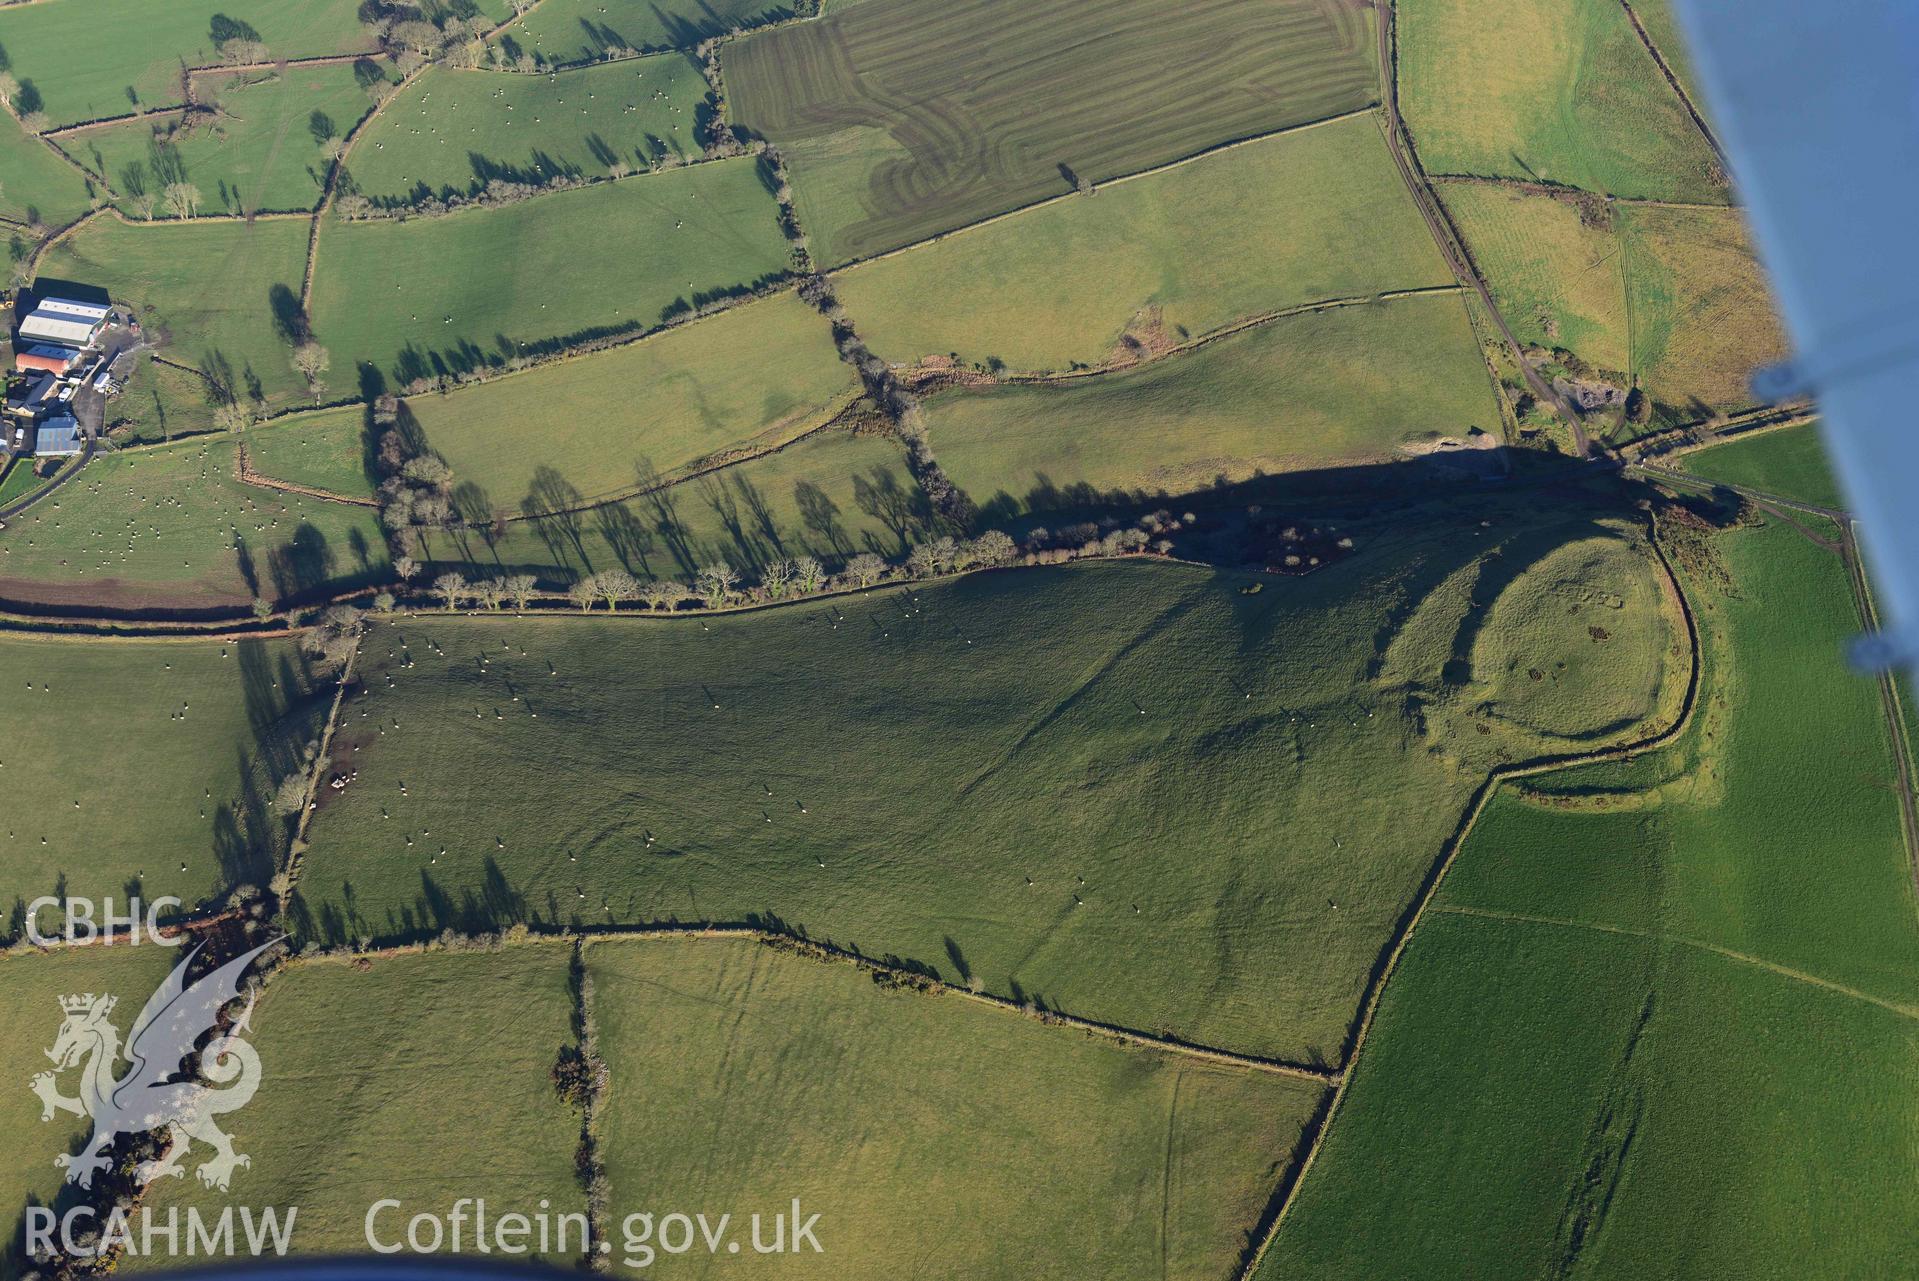 Oblique aerial photograph of Castell Perthi Mawr, with earthworks of prehistoric fields to the north west. Taken during the Royal Commission’s programme of archaeological aerial reconnaissance by Toby Driver on 17th January 2022